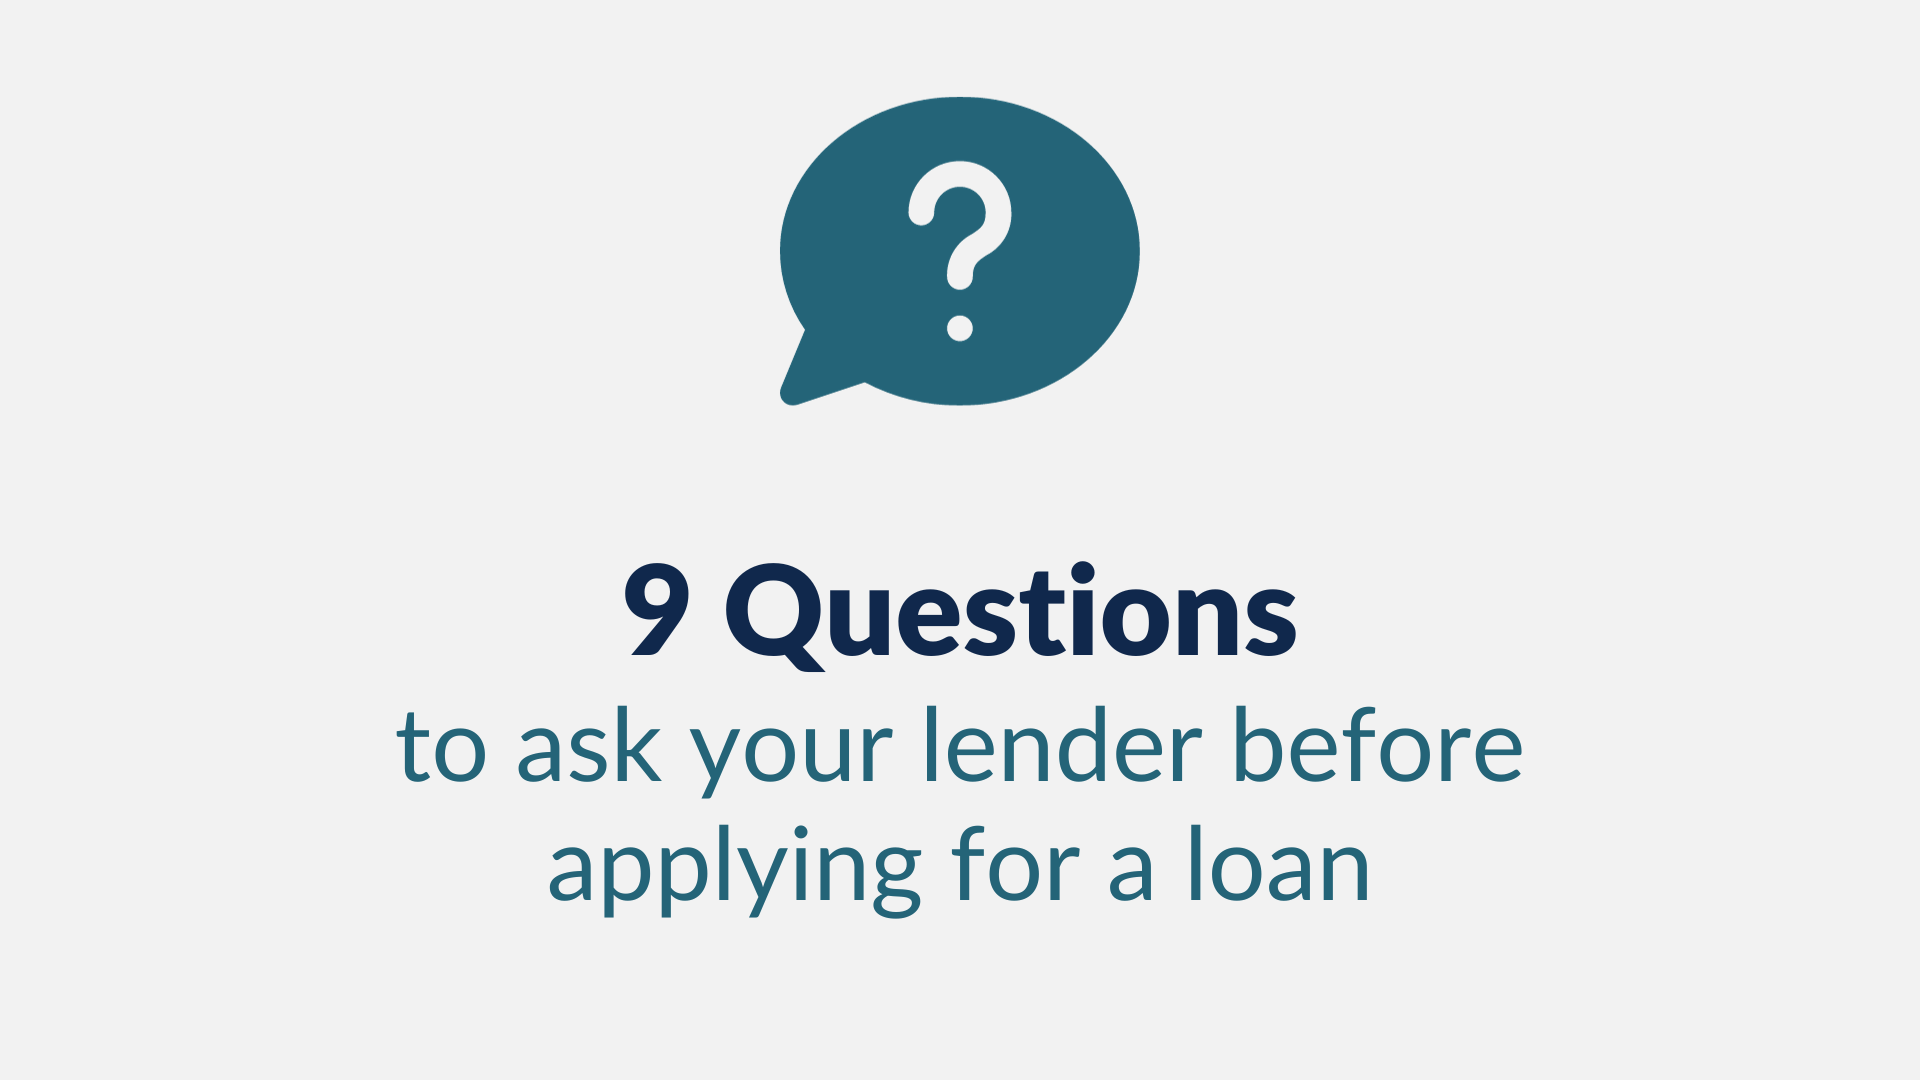 9 Questions to Ask Your Lender